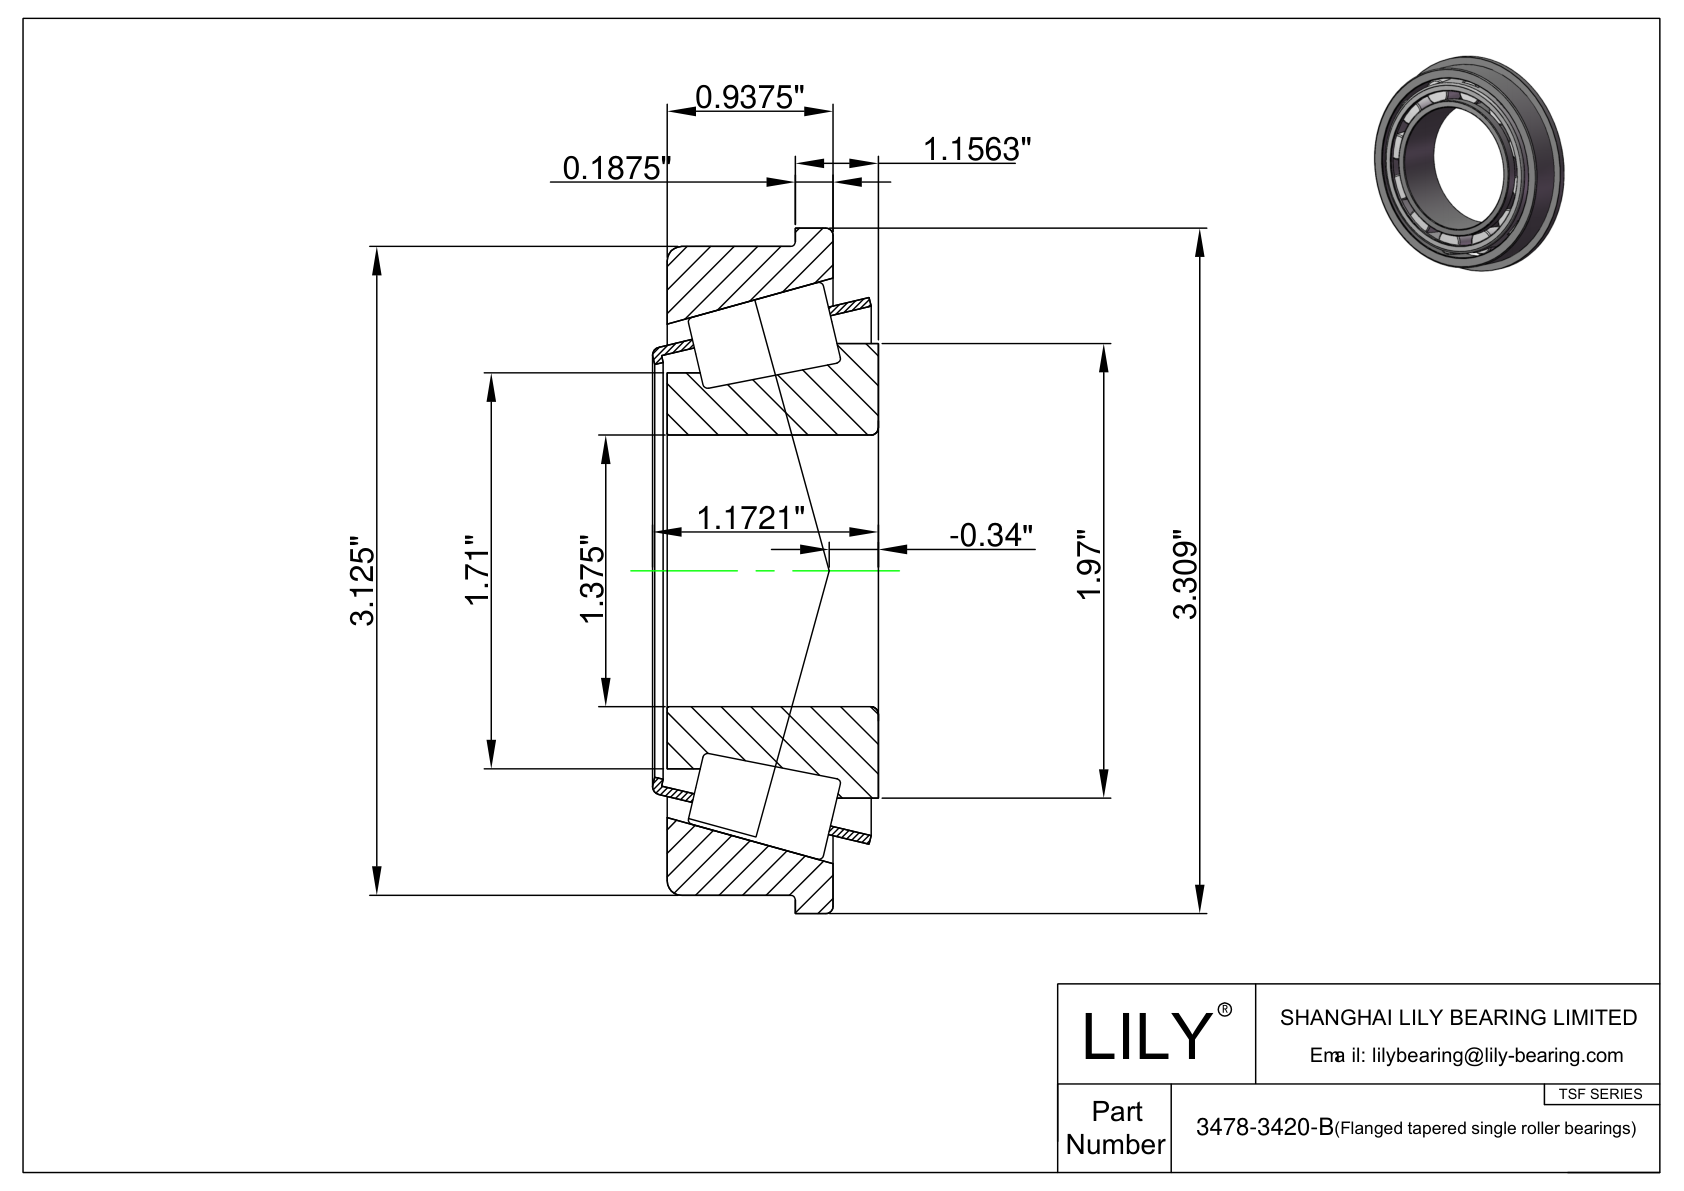 3478-3420-B TSF (Tapered Single Roller Bearings with Flange) (Imperial) cad drawing